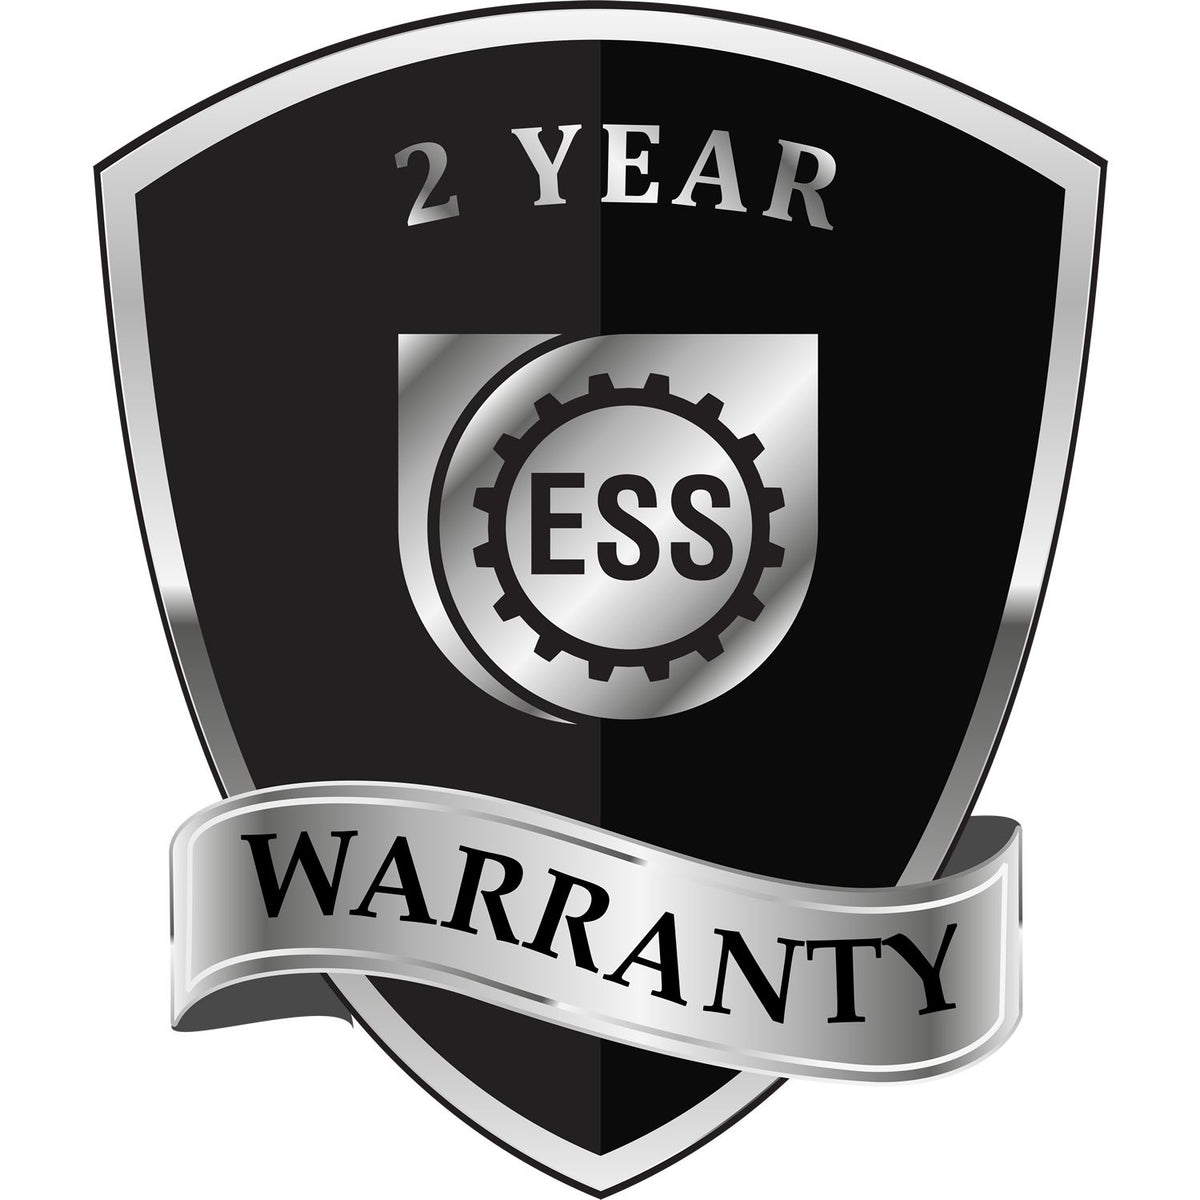 A badge or emblem showing a warranty icon for the South Carolina Engineer Desk Seal